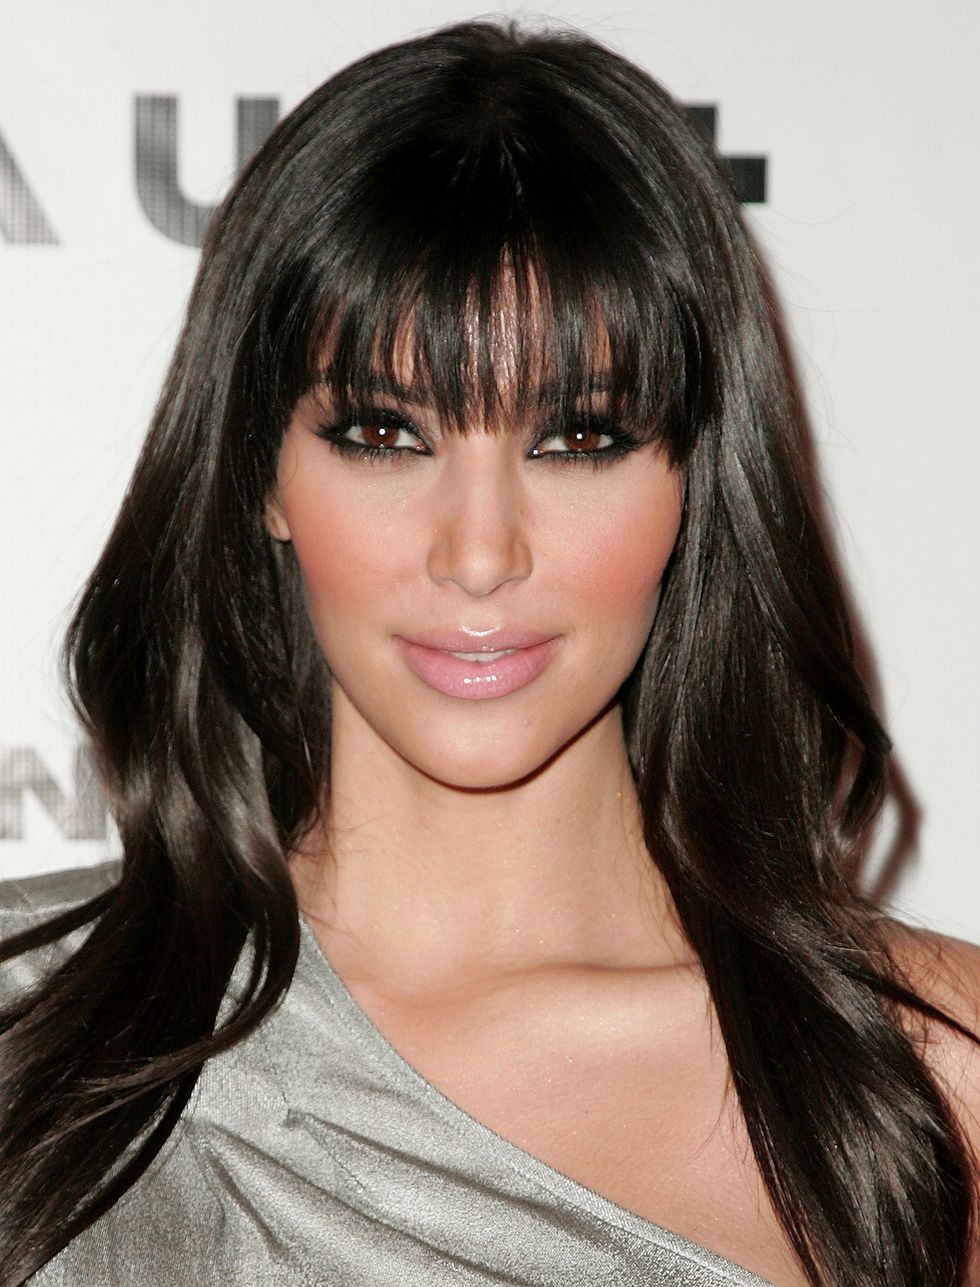 kim kardashian before after keeping up with the kardashians face 2008